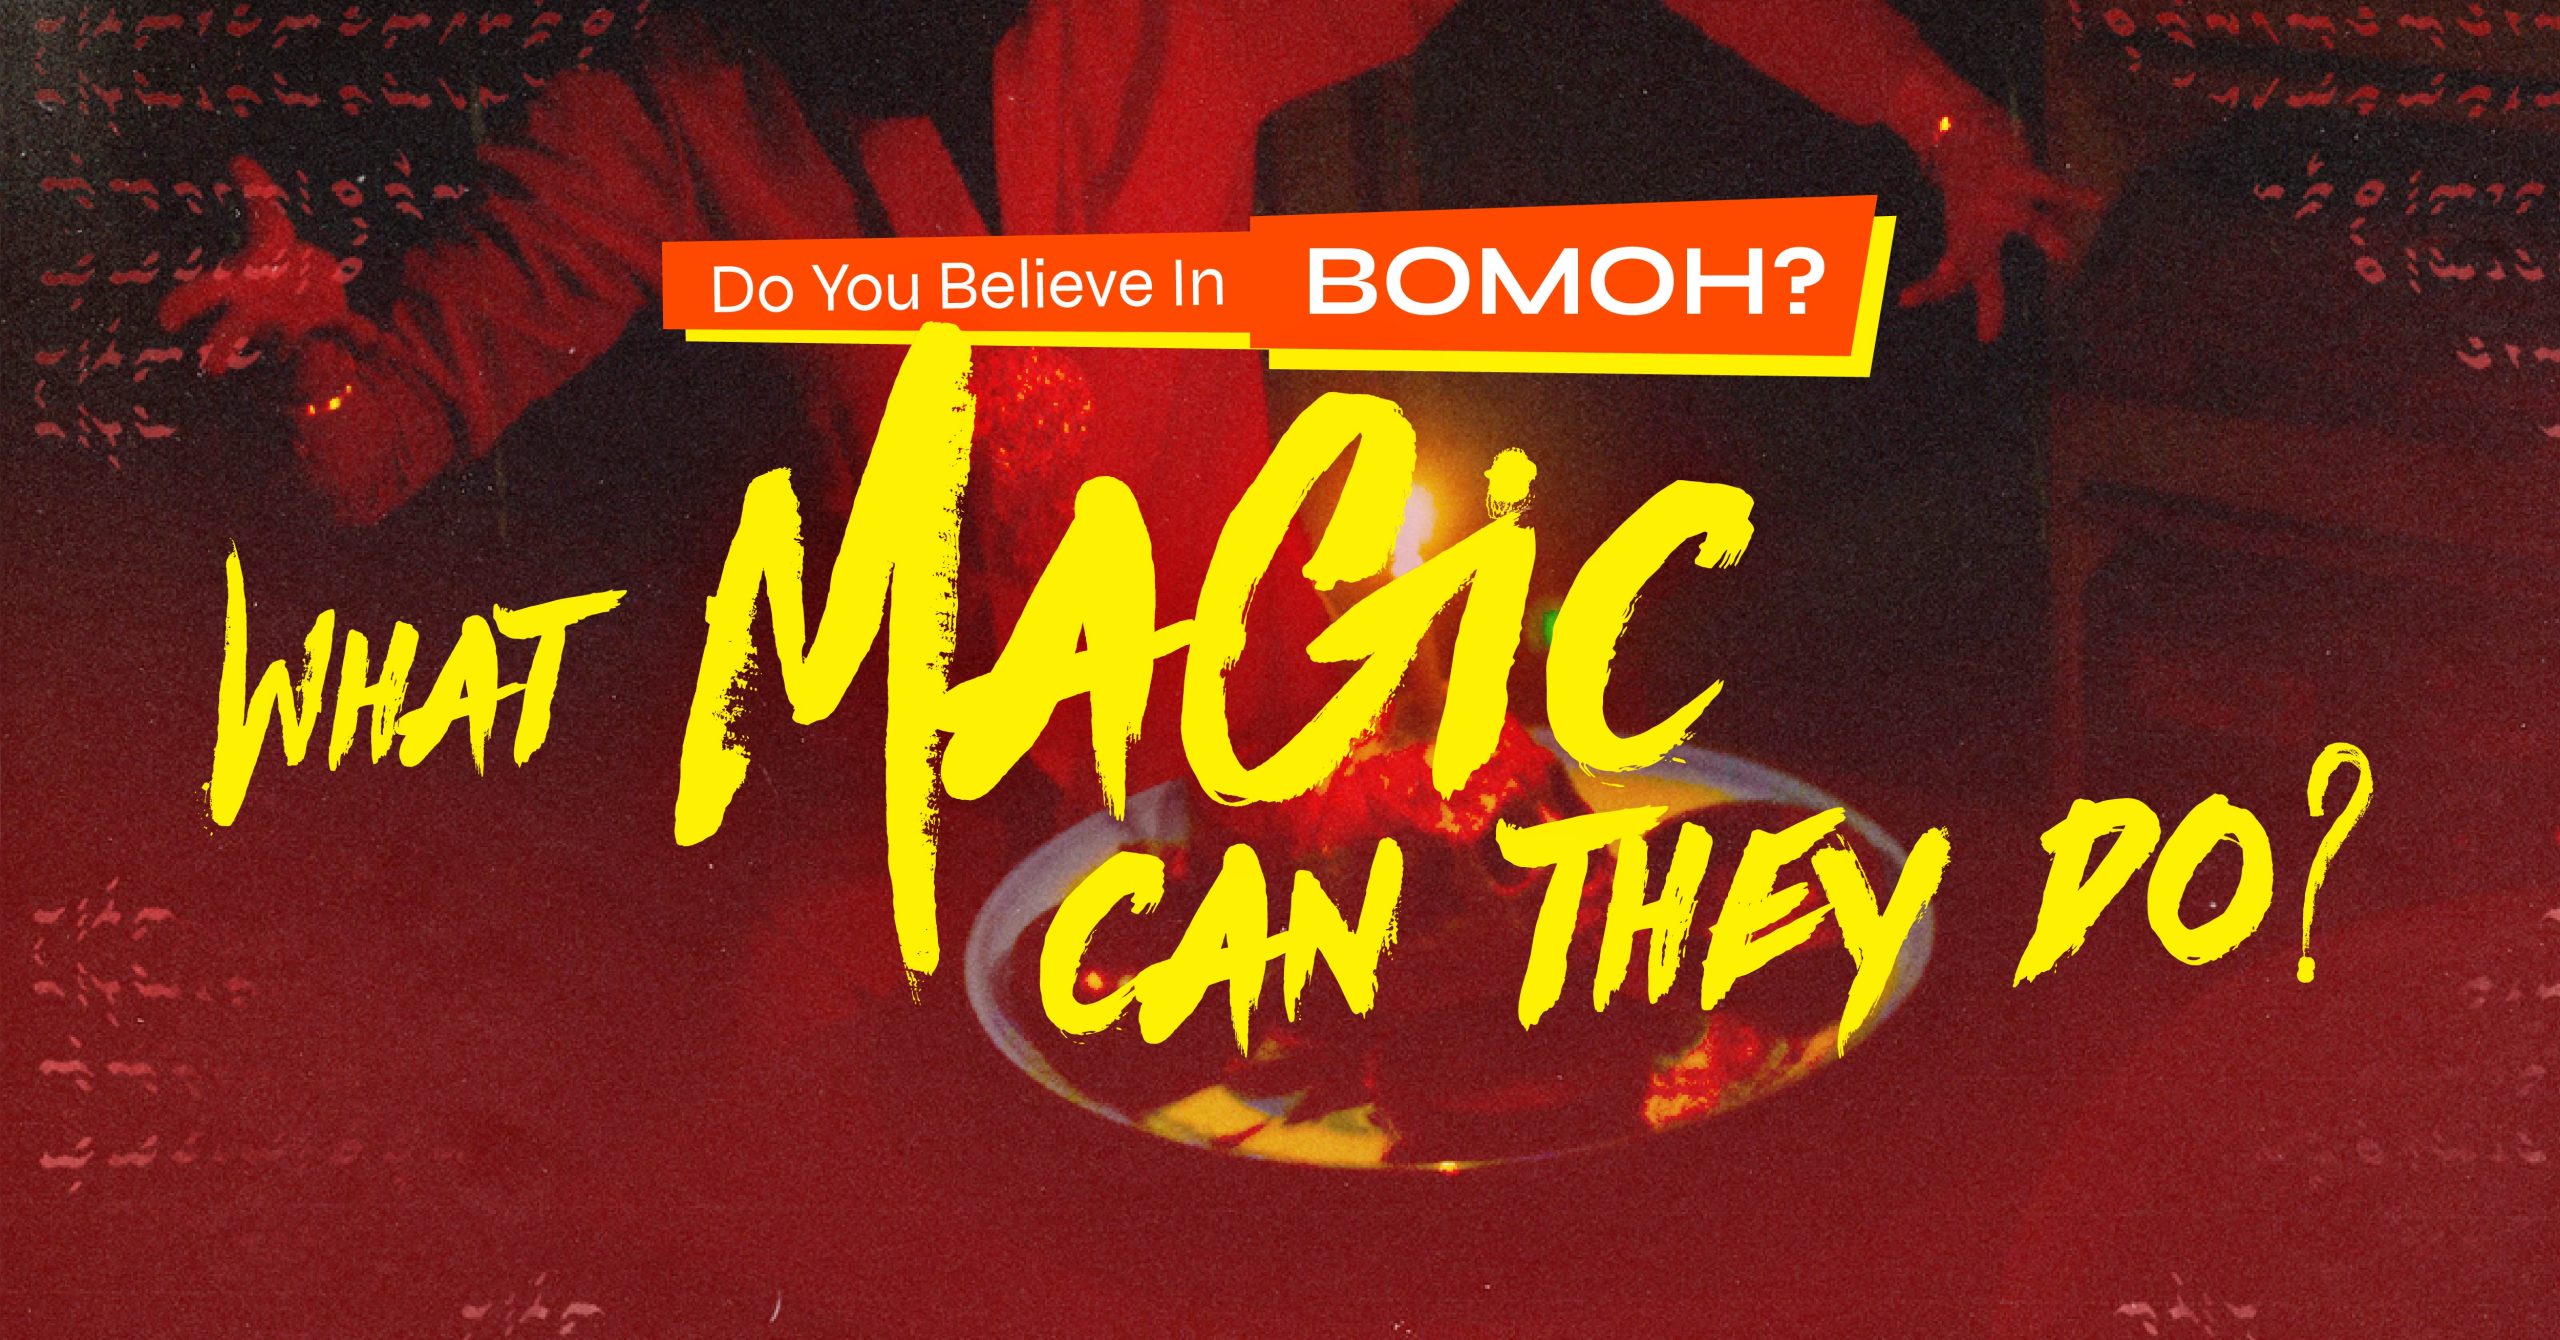 What can Bomoh do? What magic can they do?